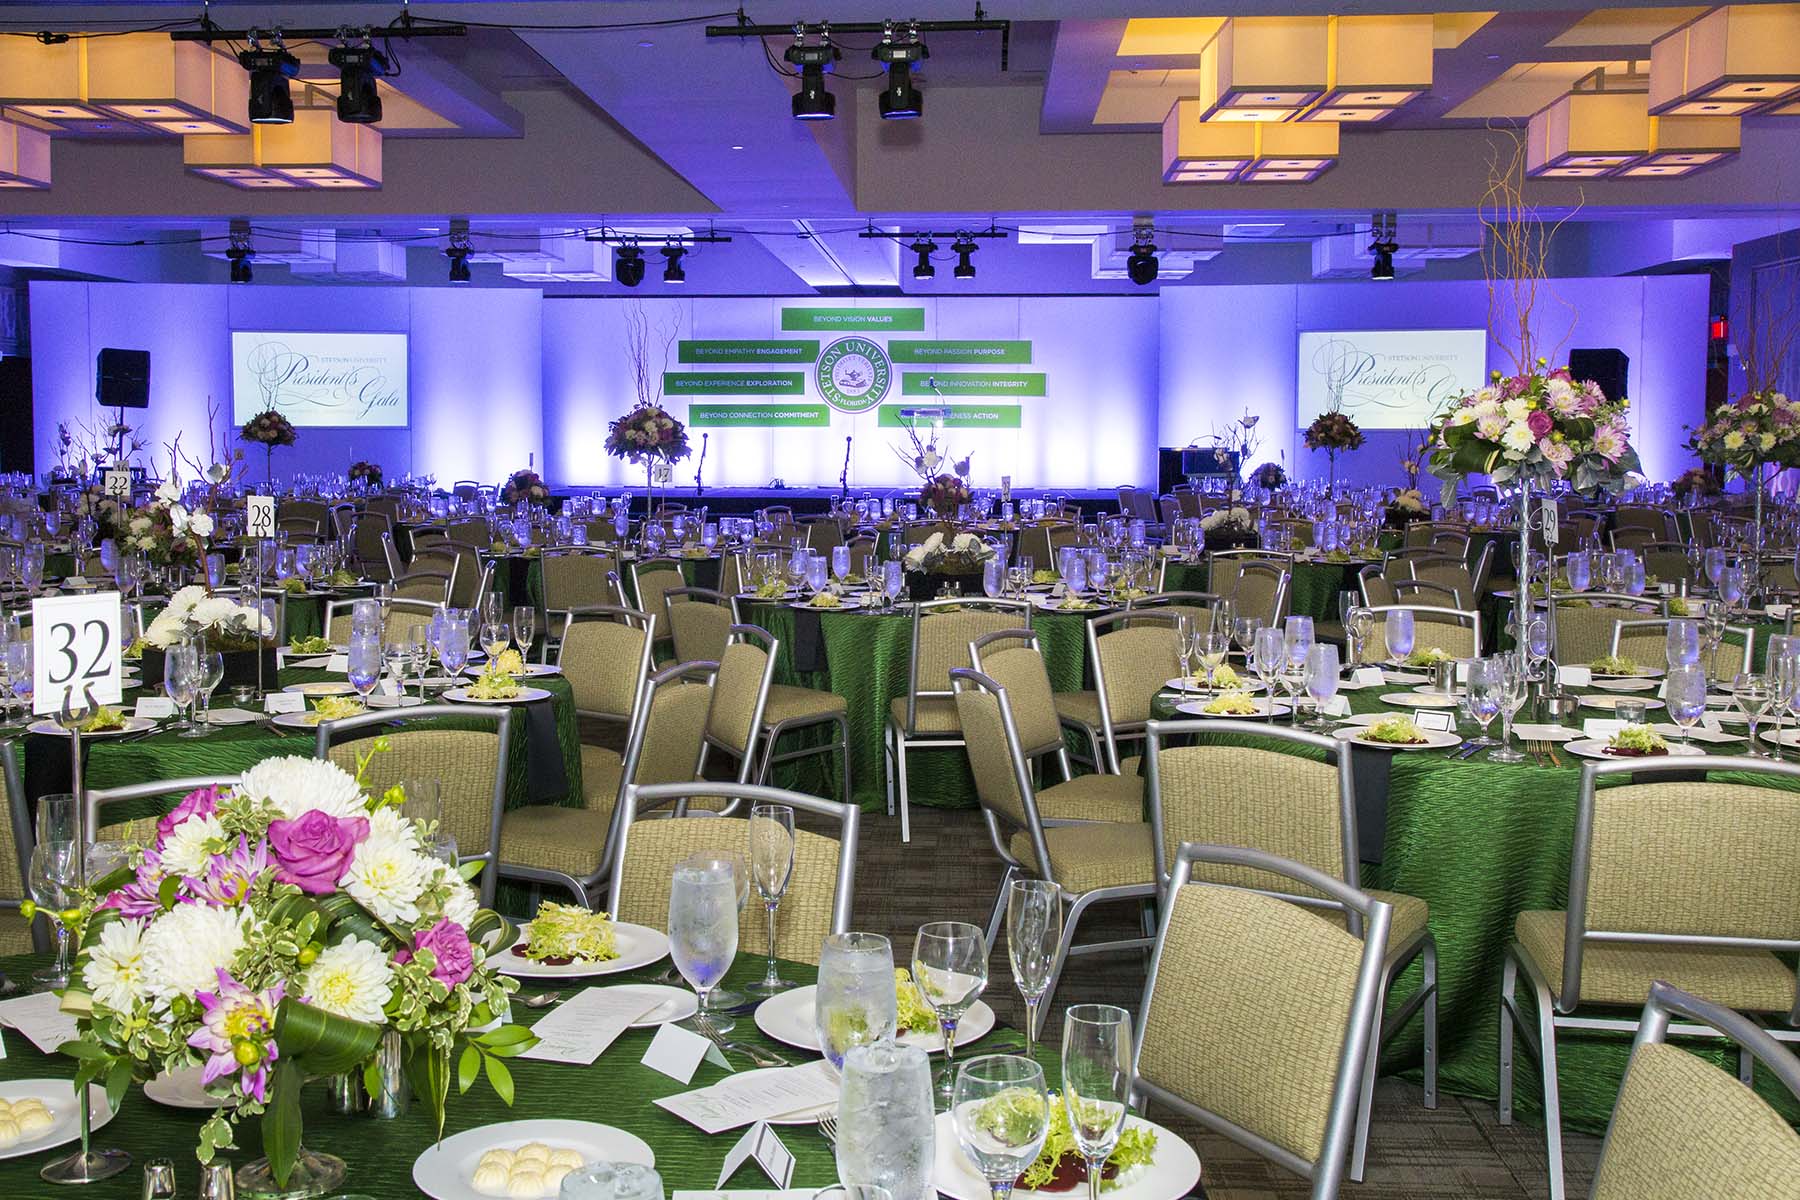 A gala all setup before the event